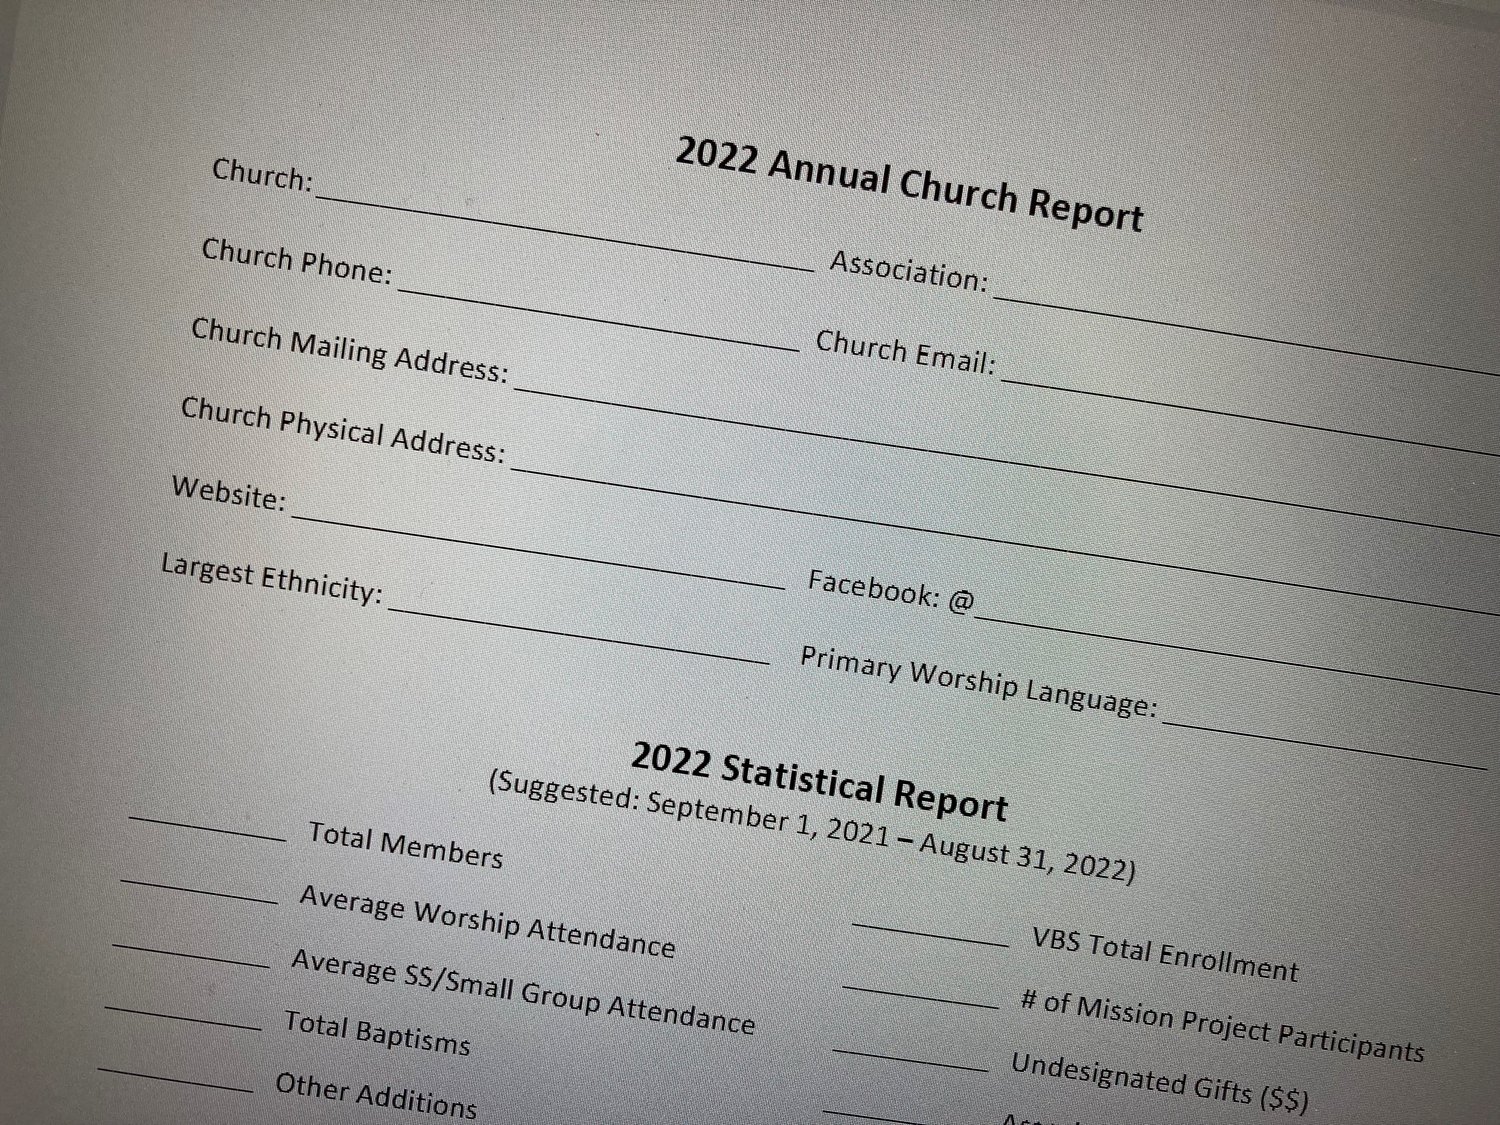 The Annual Church Report provides basic information helpful to the entire Southern Baptist Convention.